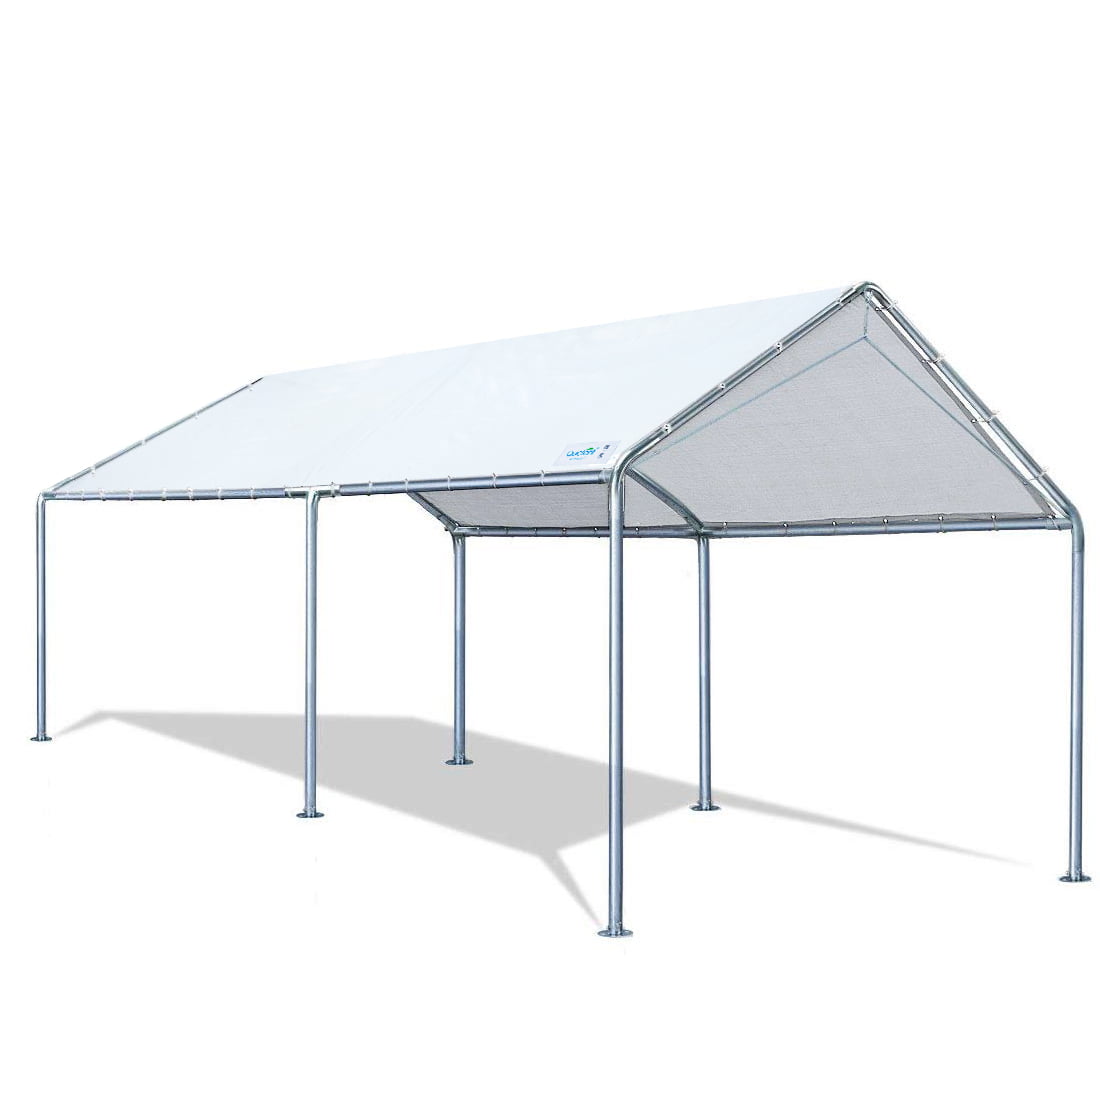 Quictent 10x20 Ft Upgraded Heavy Duty Carport Car Canopy Party Tent With Reinforced Steel Cables White Walmart Com Walmart Com